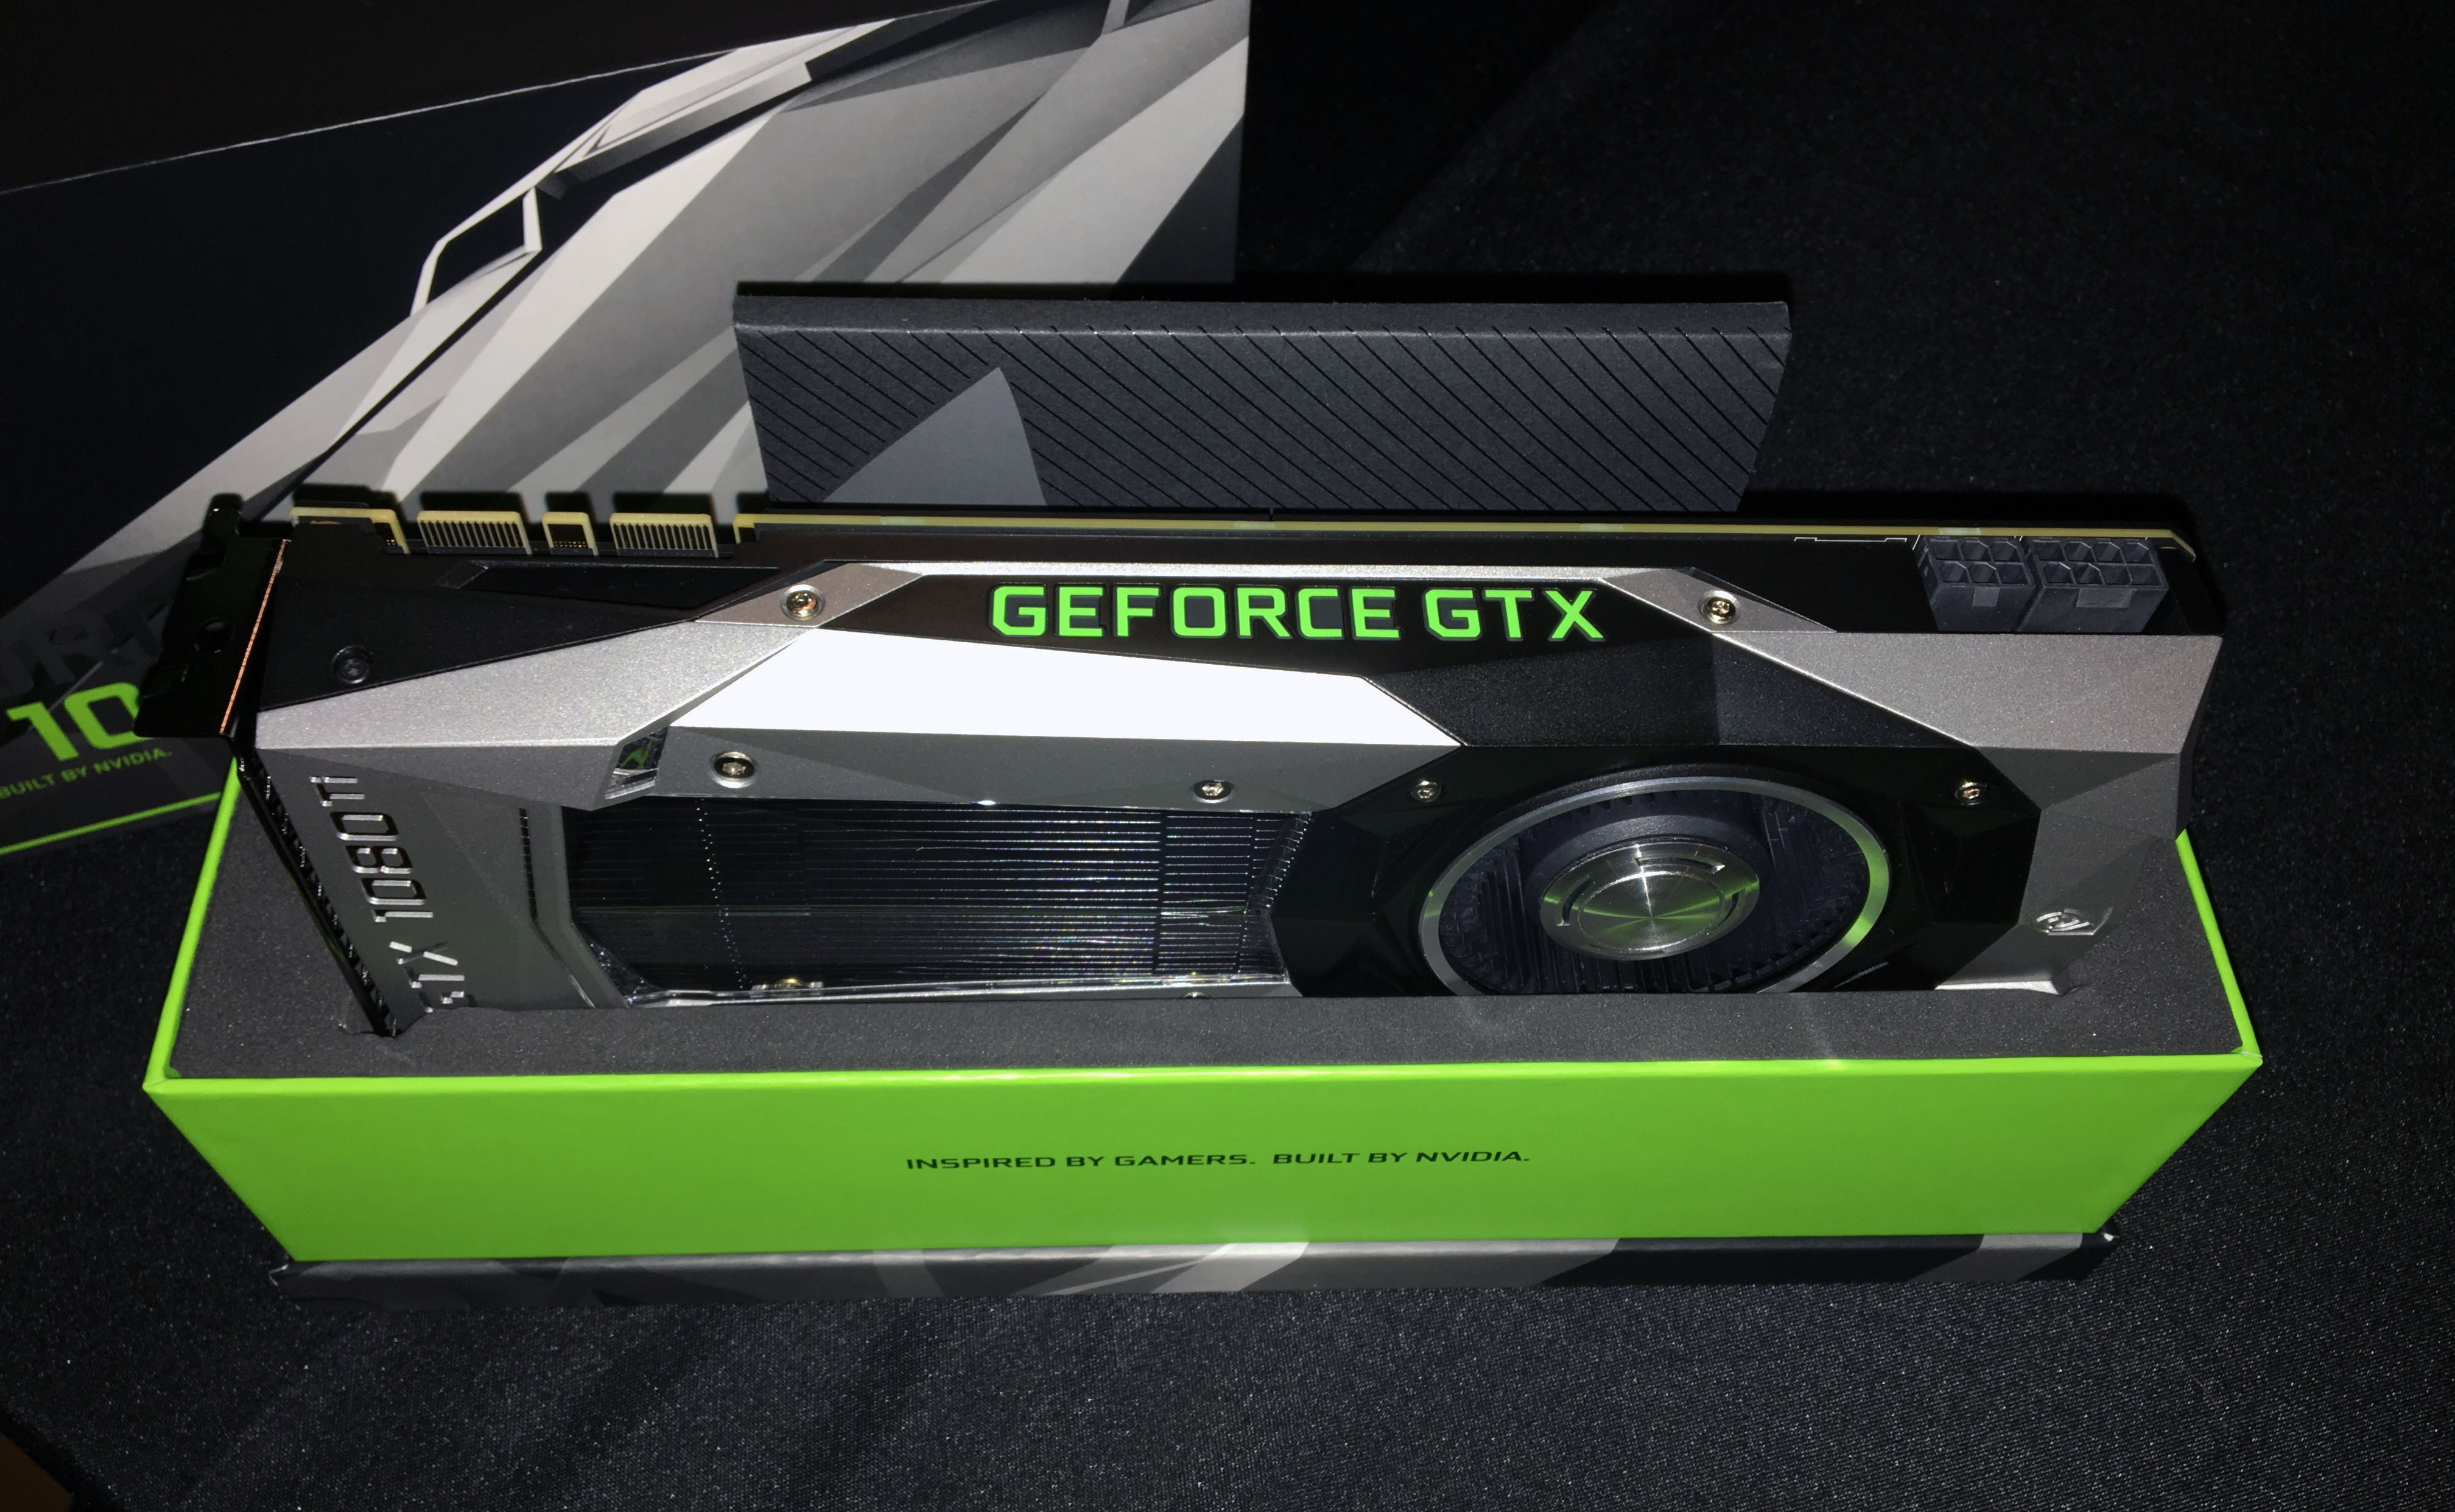 how much vram does nvidia geforce gtx 860m have